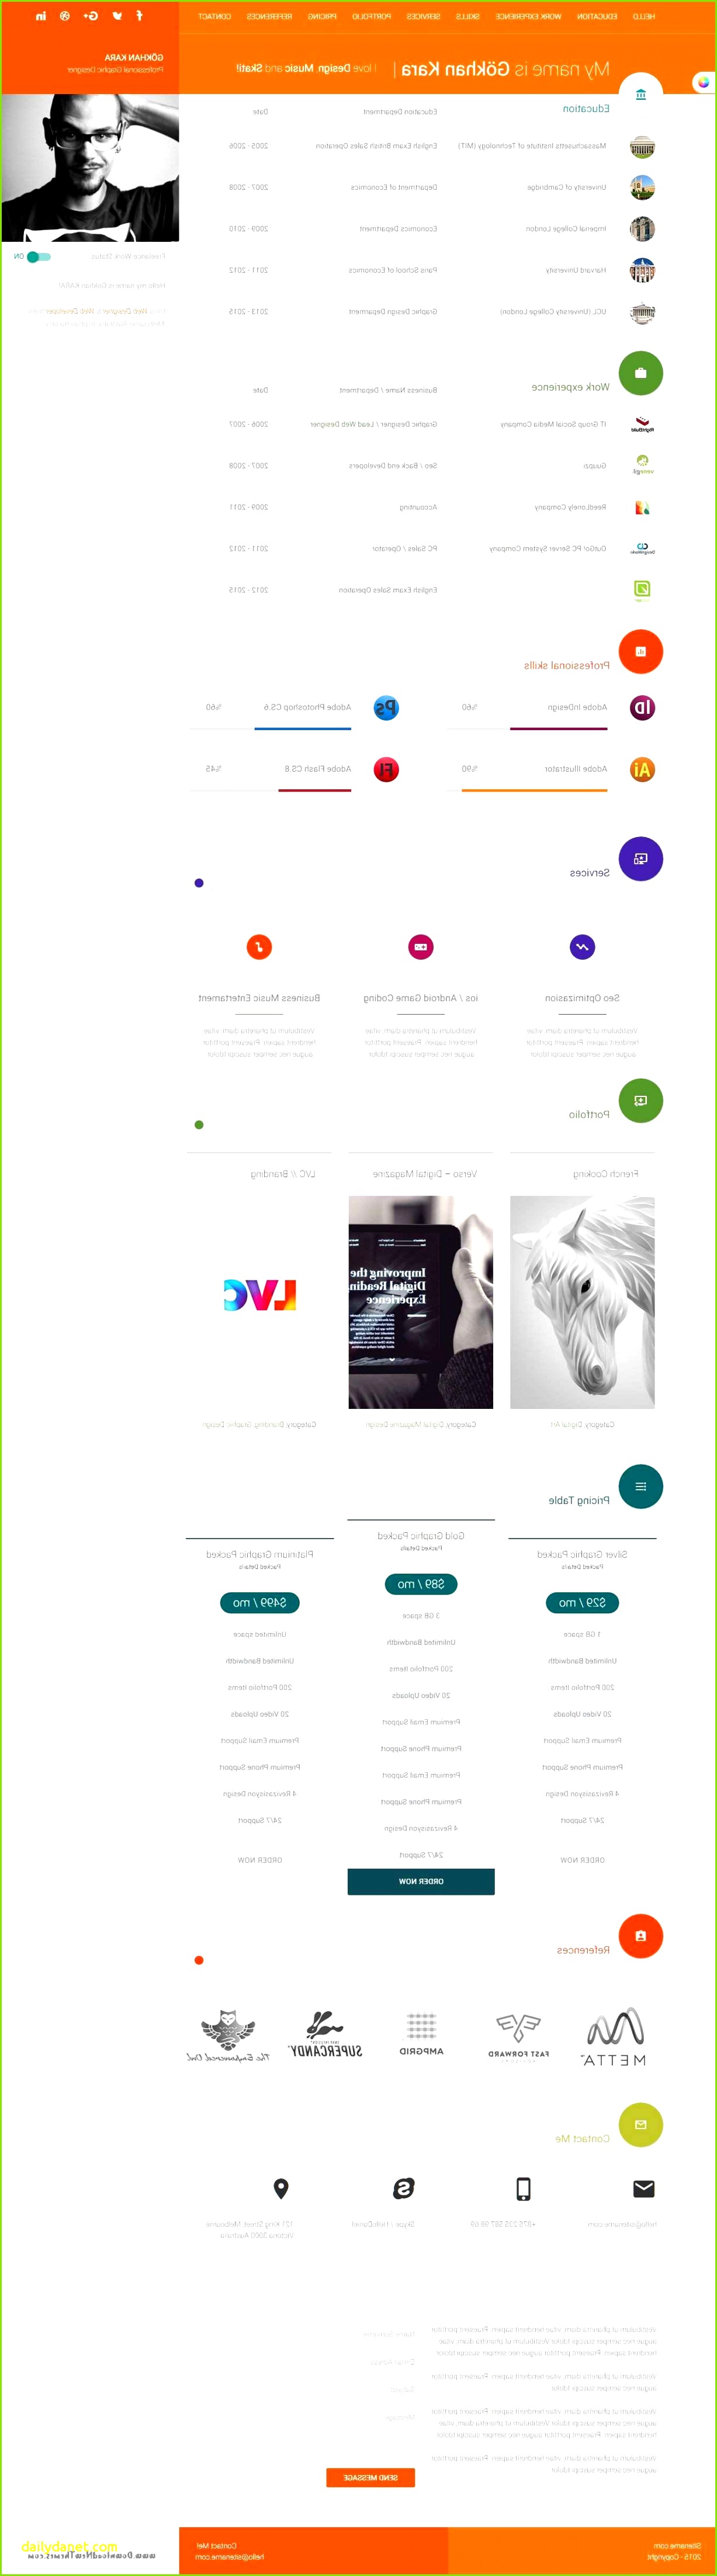 Web Templates Free 2018 Free HTML Website Templates Awesome Simple Website Templates S